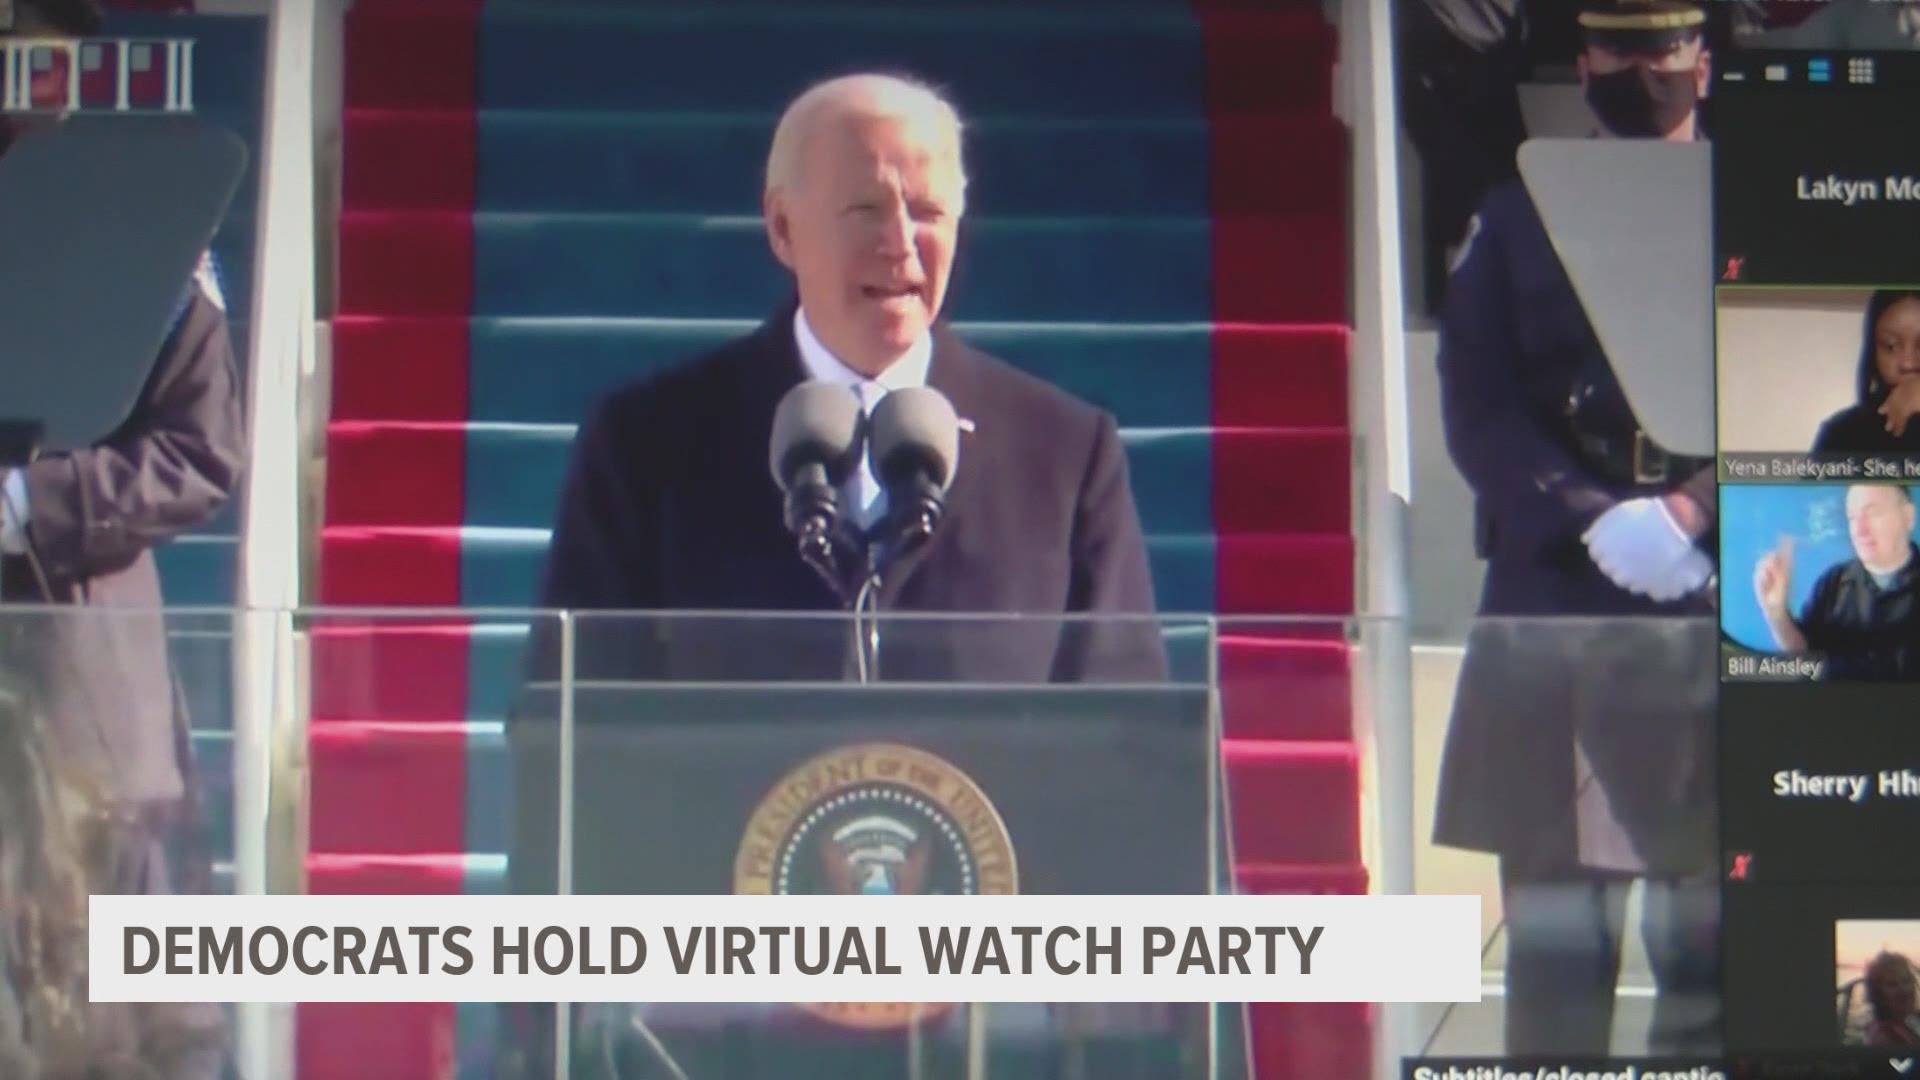 The Iowa Democratic Party offered a safe way to celebrate President Joe Biden's ascension Wednesday and shared their hopes for the next four years.